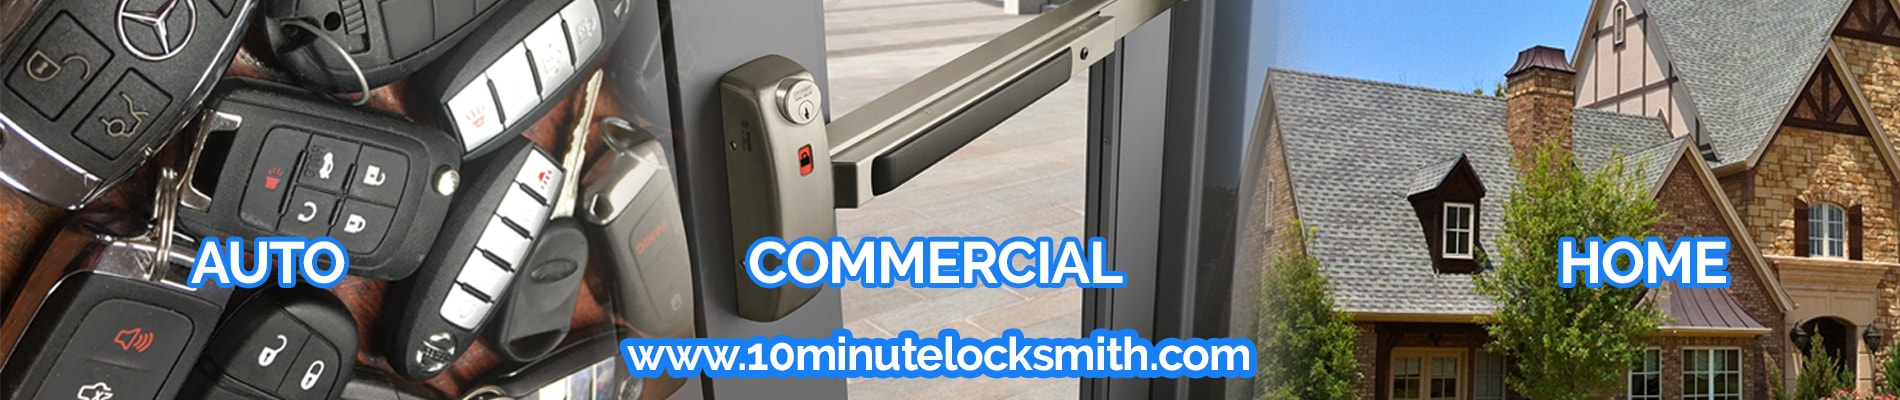 Our locksmith services